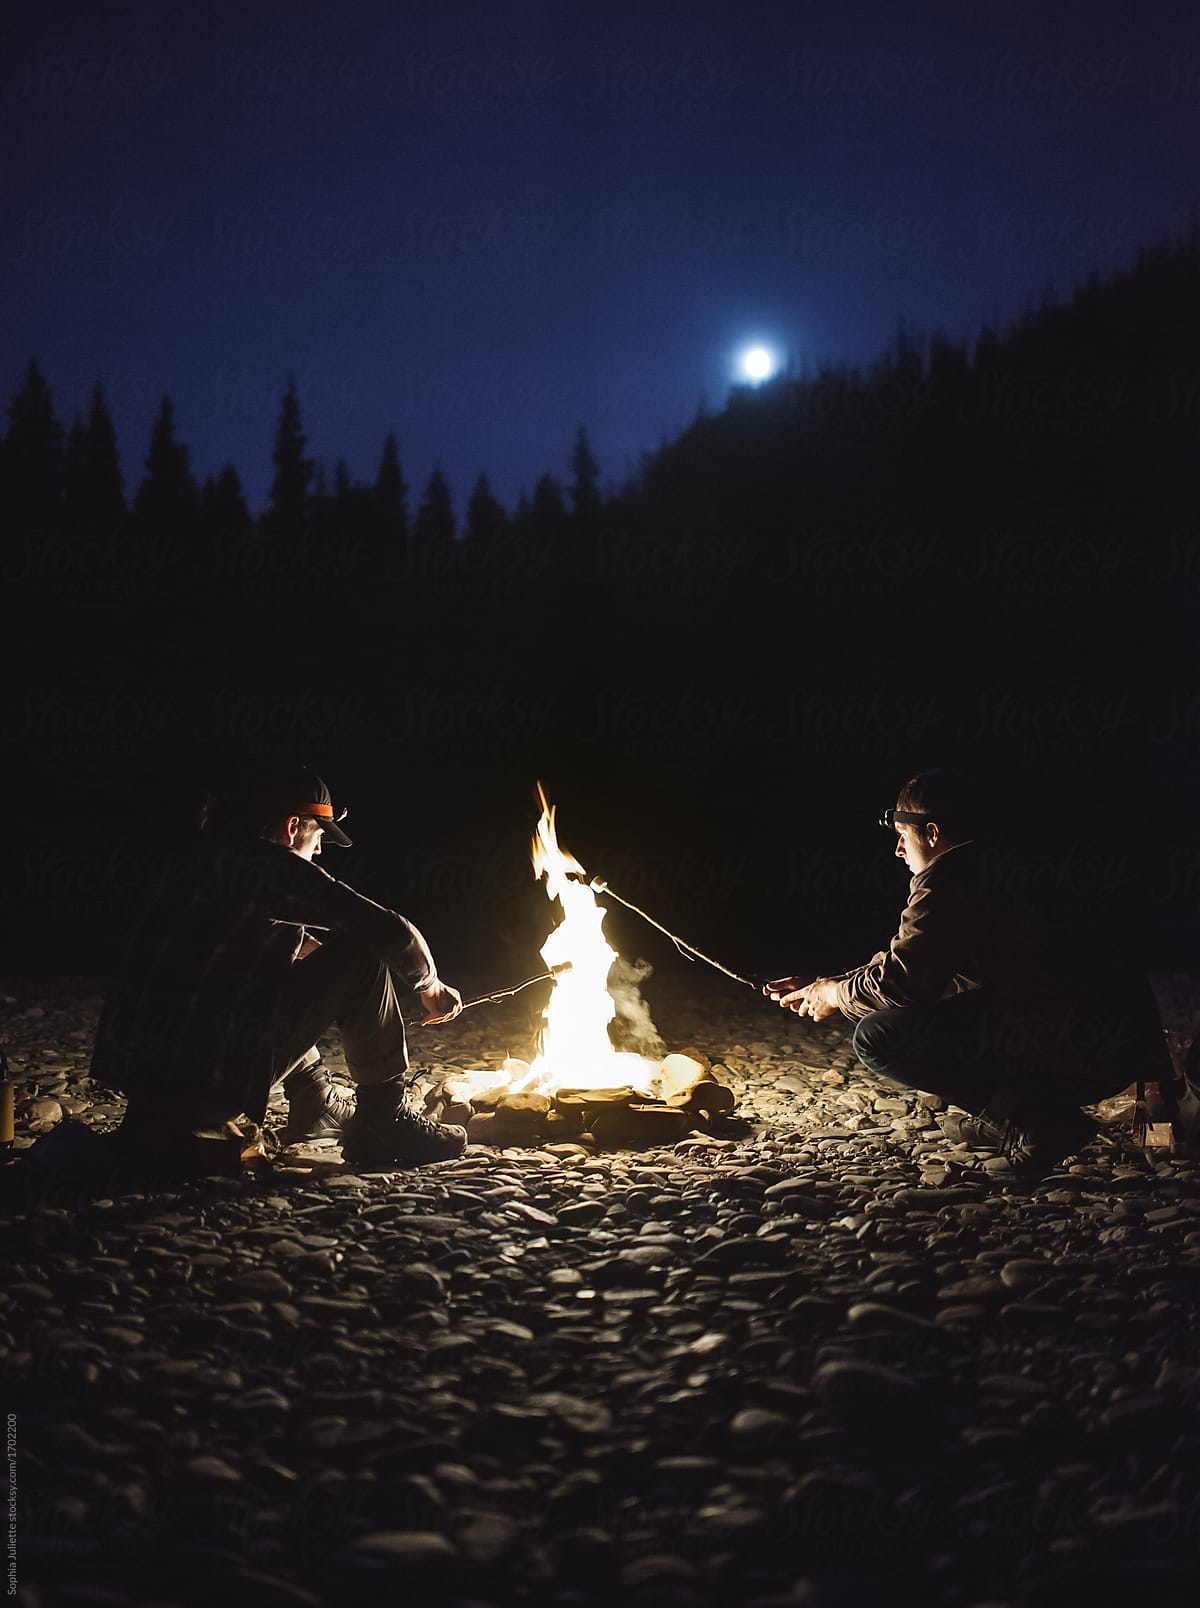 Two Guys Roasting Marshmallows by a Campfire